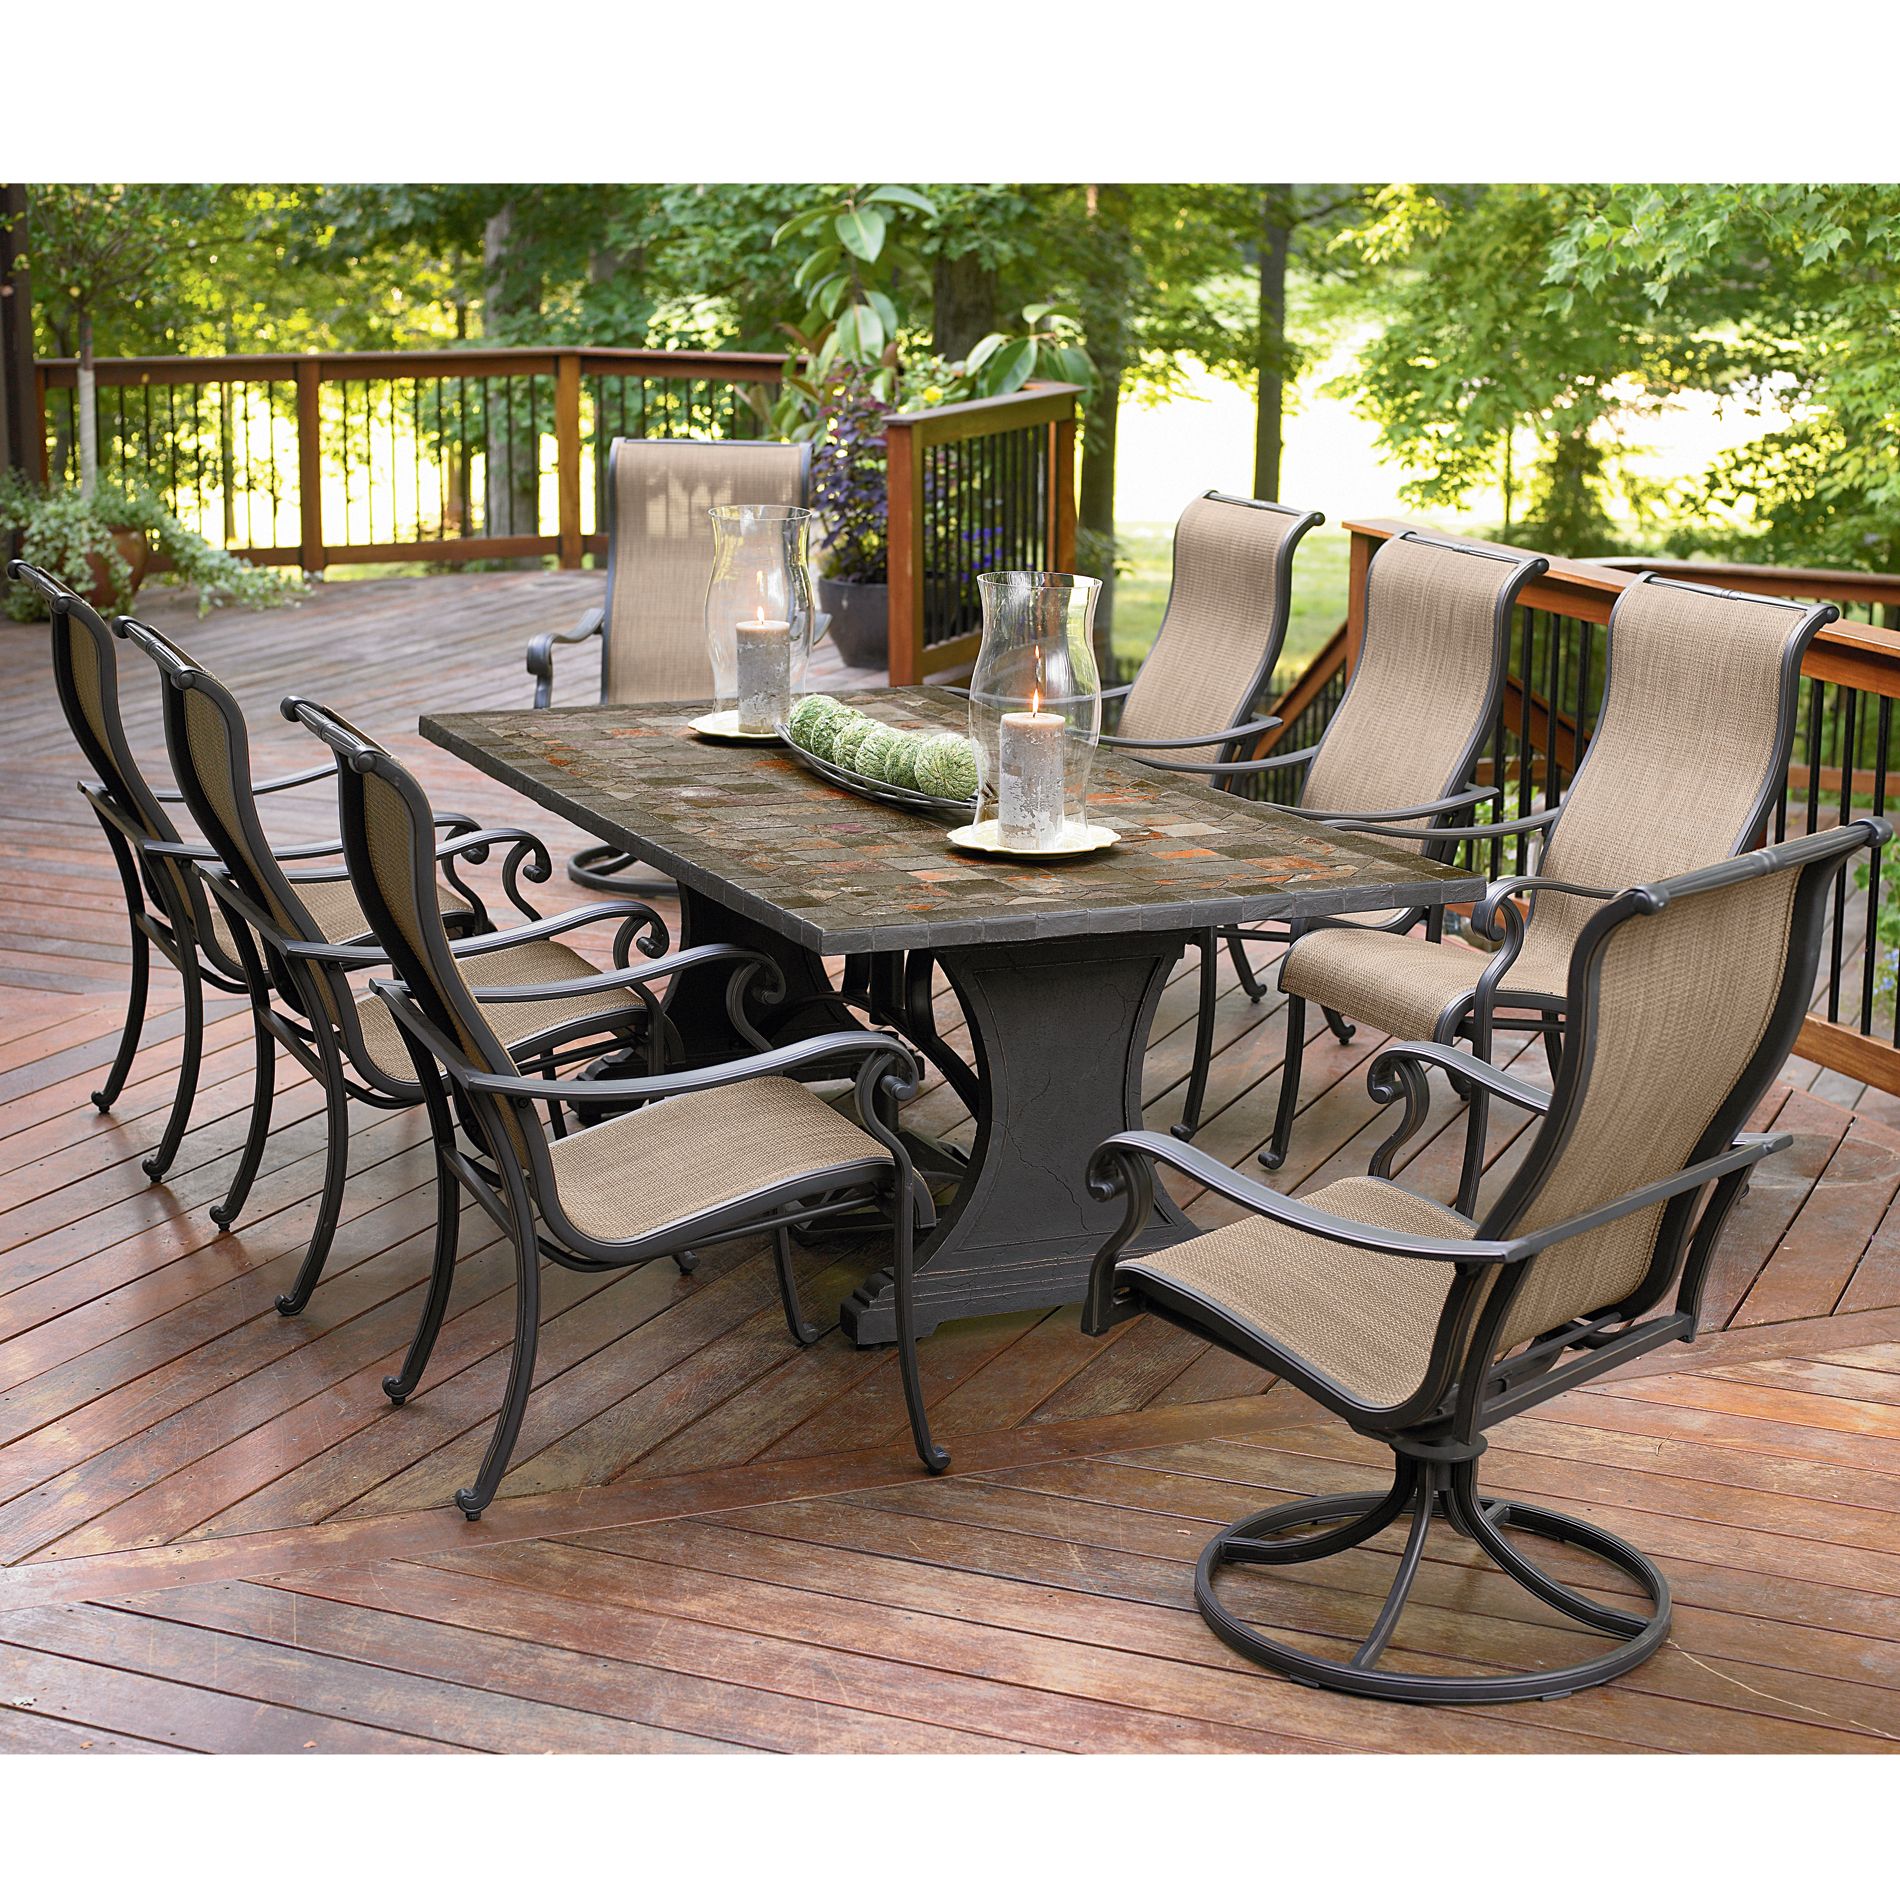 patio furniture dining sets photo - 5